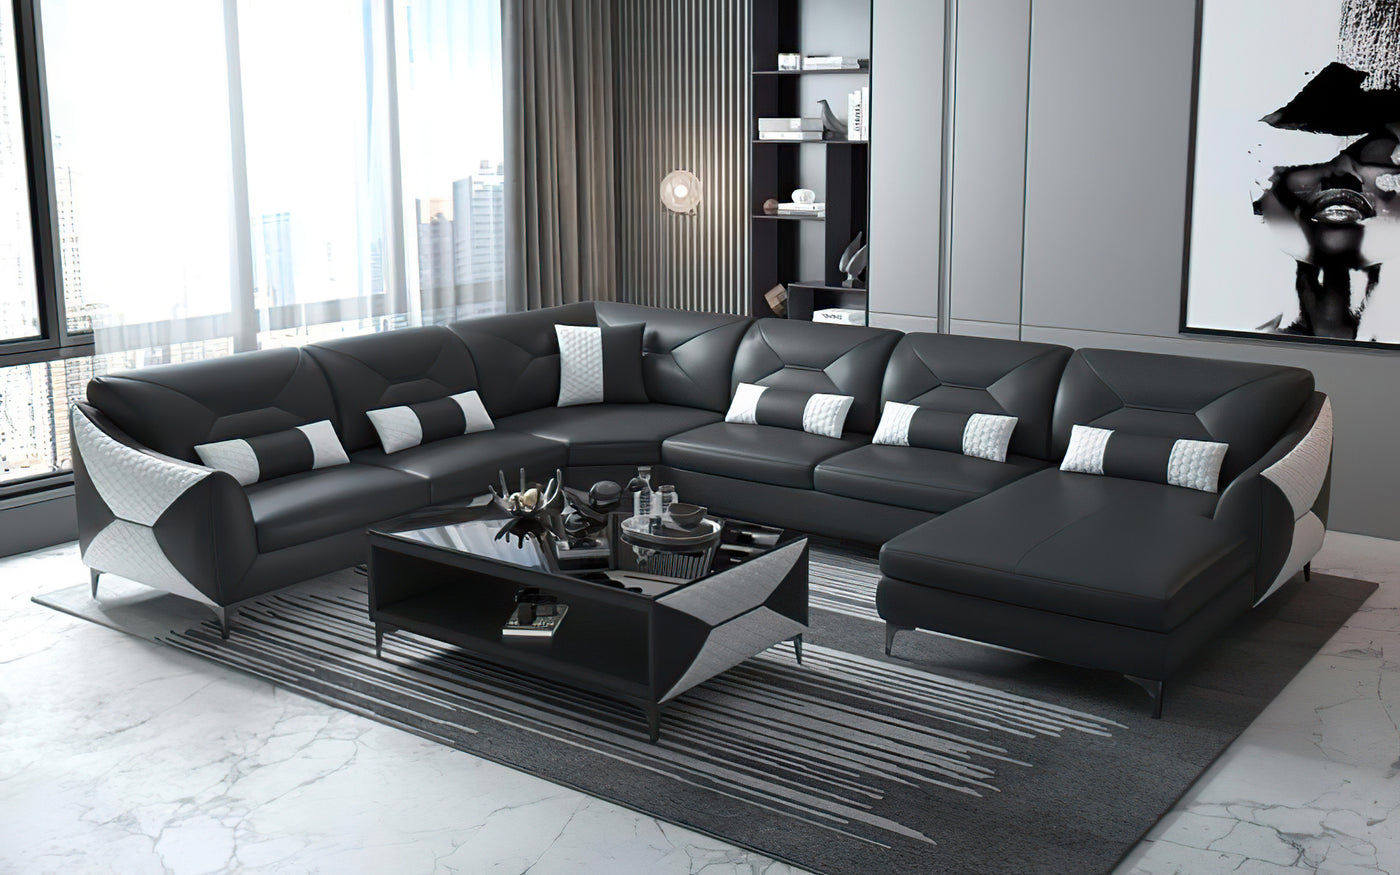 Bysic Modern Leather Sectional